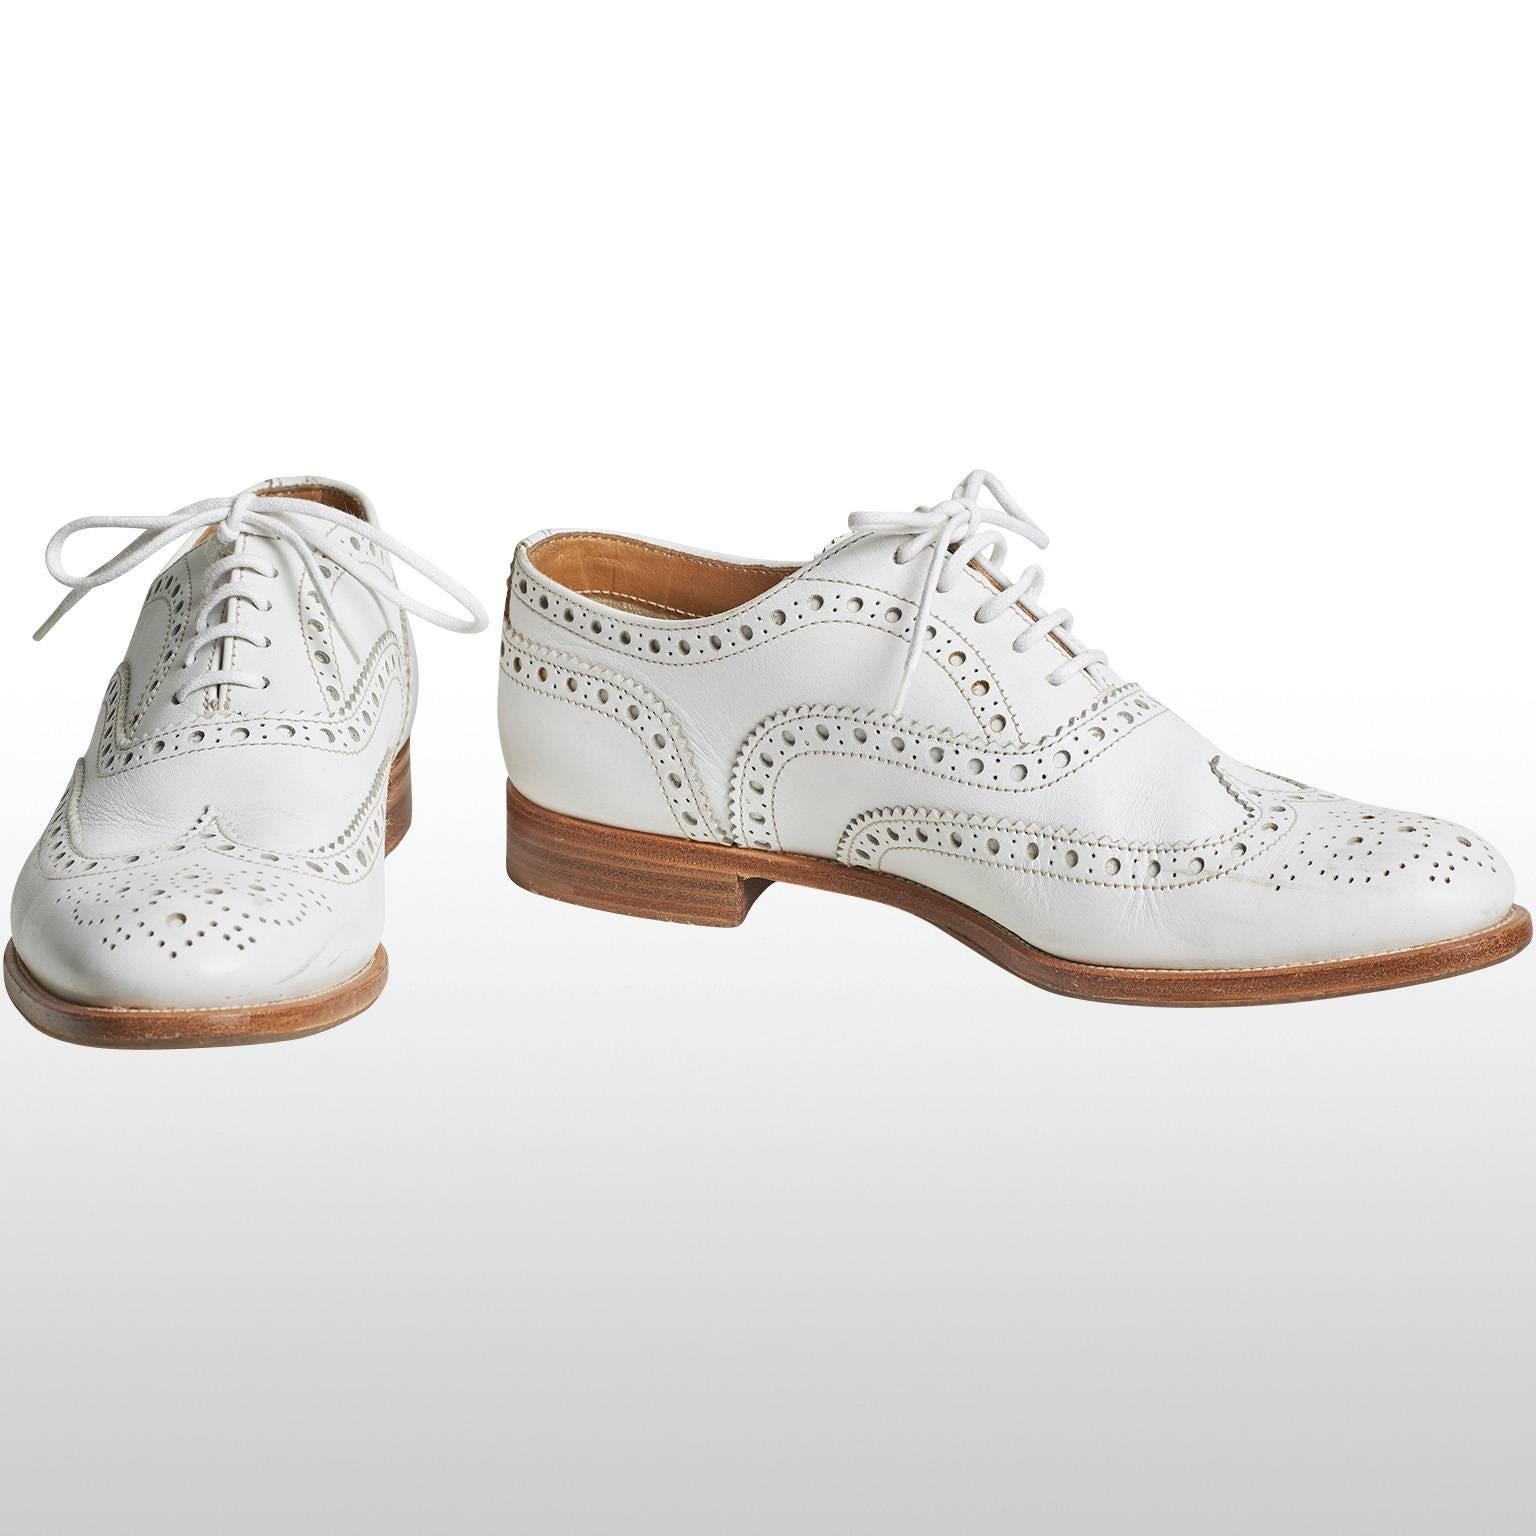 These are white brogues shoes from the brand Church, which is a high quality footwear brand. Remain in excellent condition.